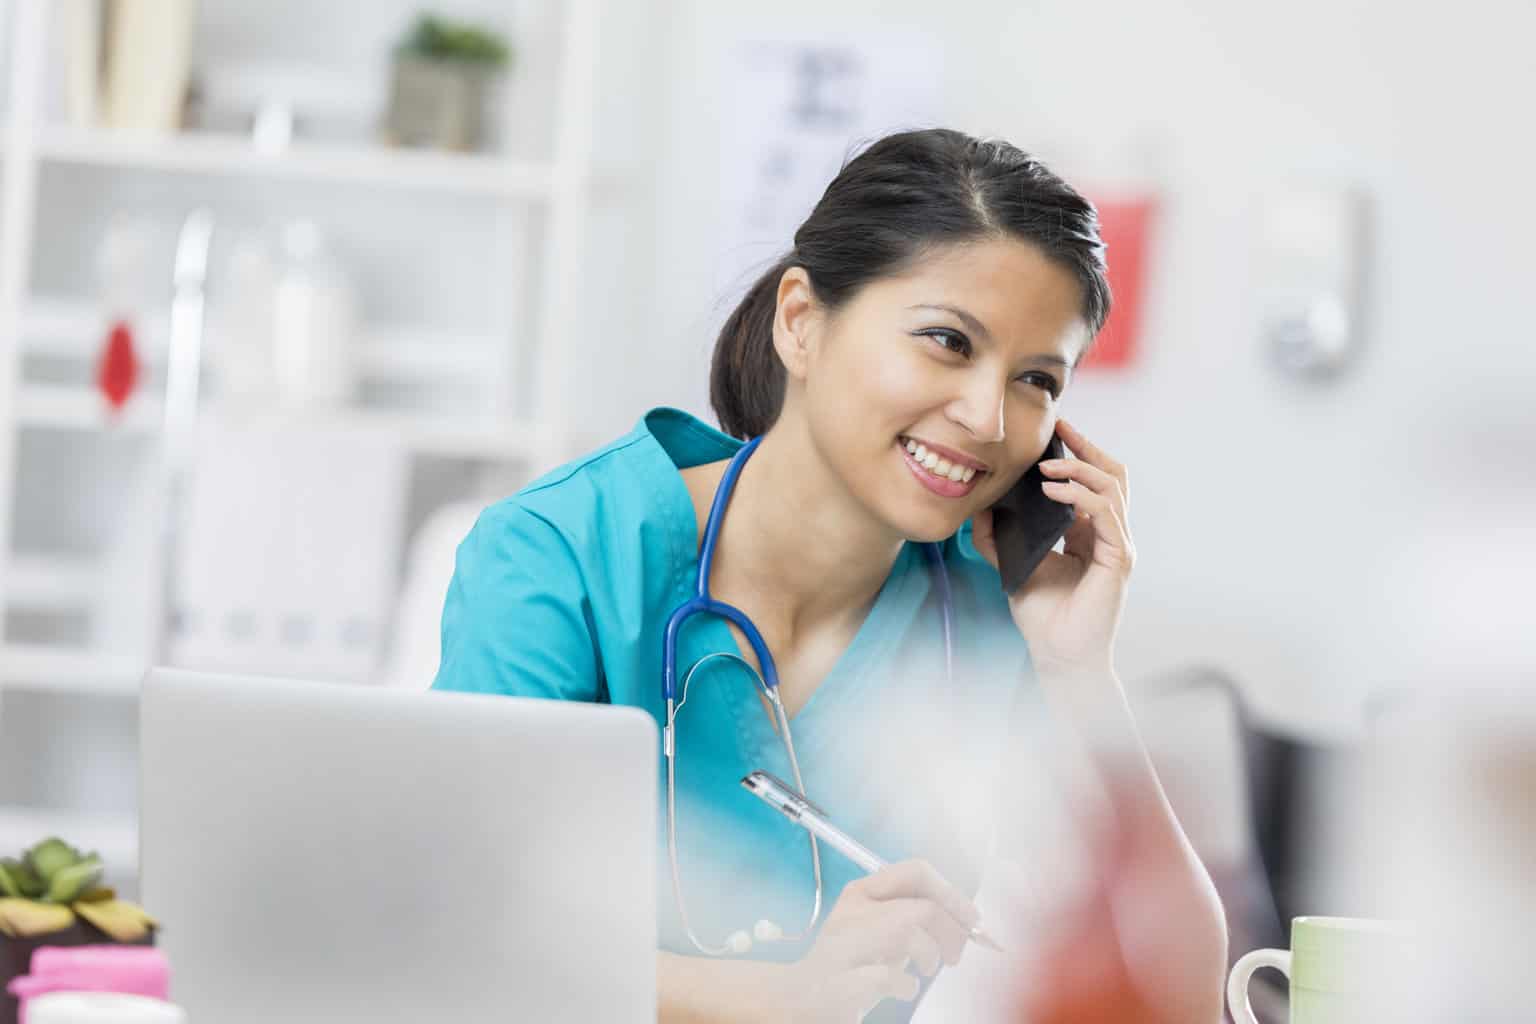 nurse answering hcmc hospital phone number talking to patient on phone, guarantor for insurance, insurance guarantor, billing phone number, hcmc hospital phone number, billing questions